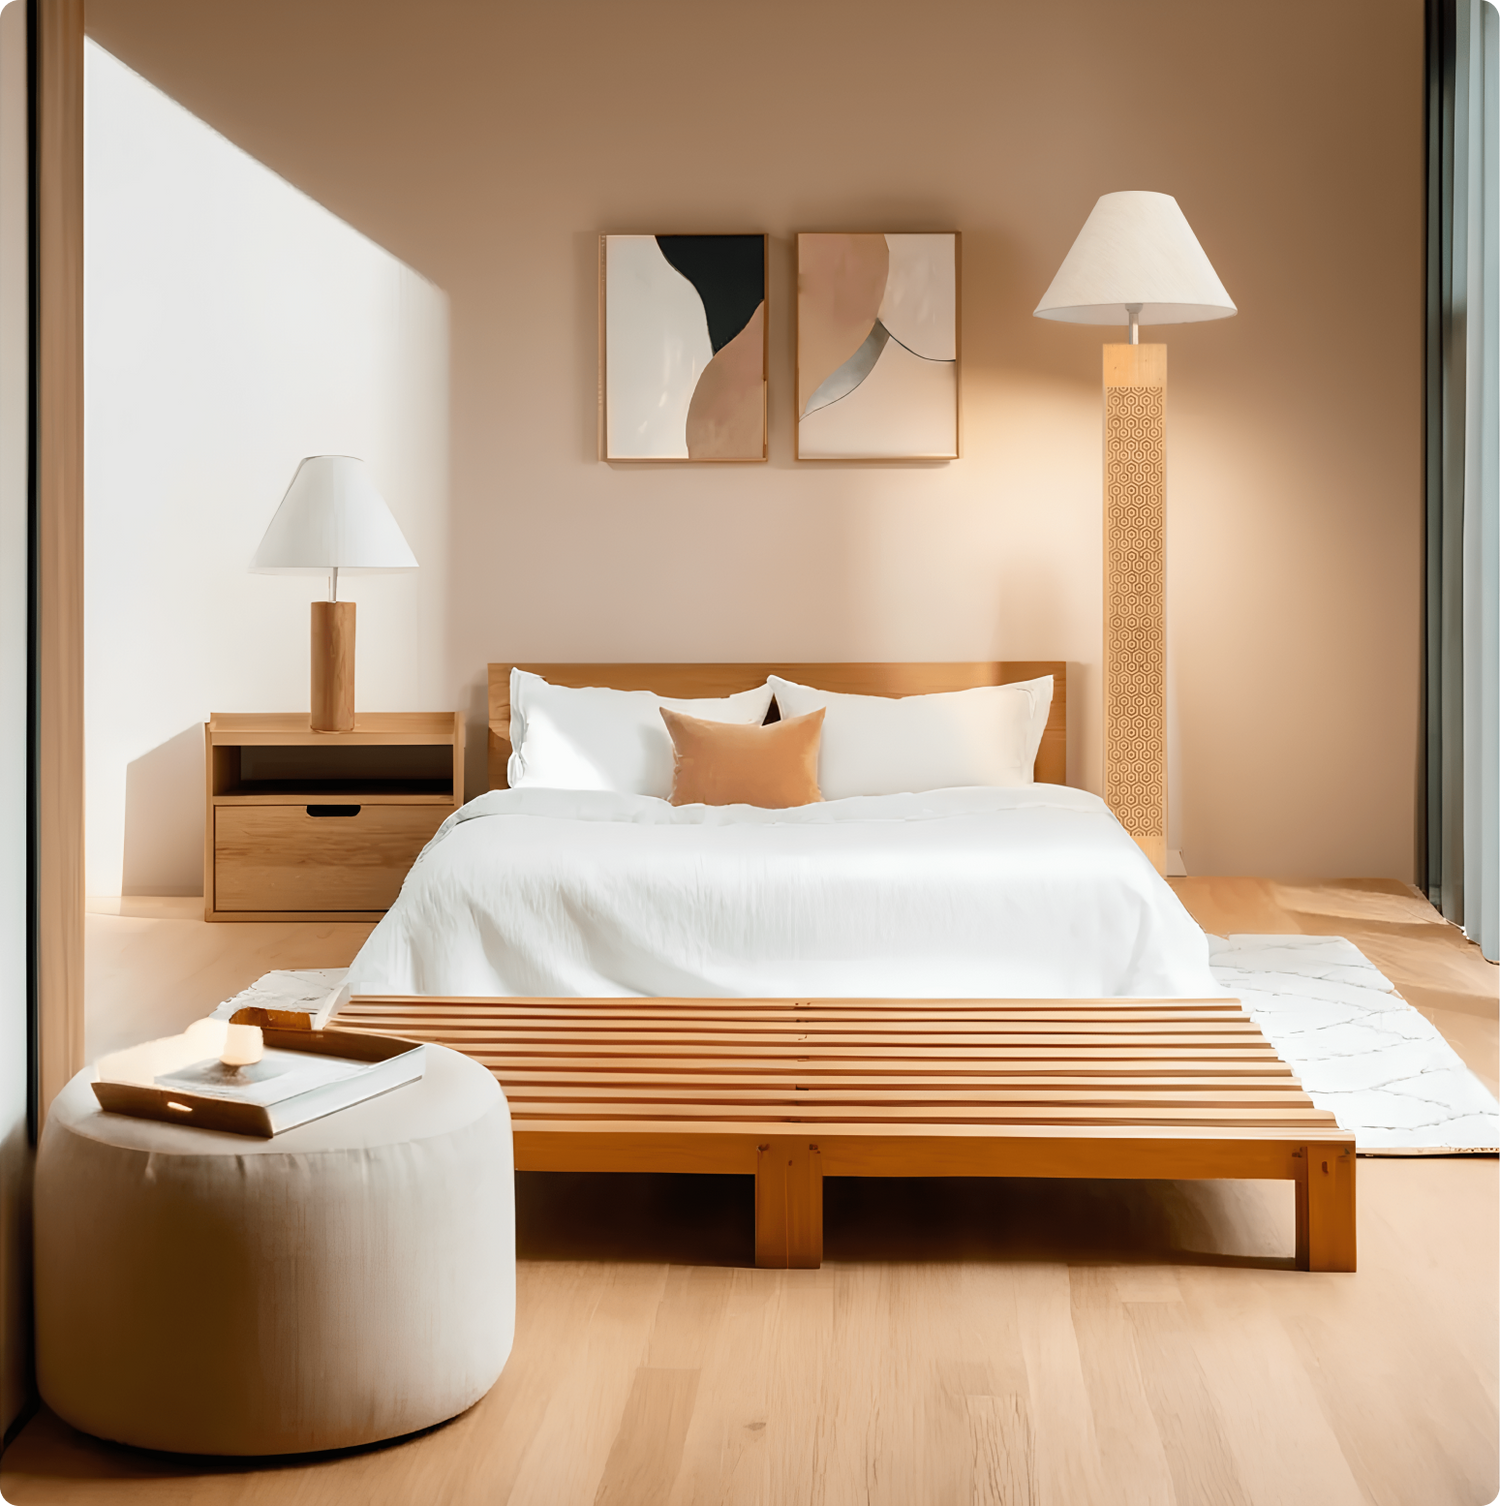 Japandi is an interior design style that is a fusion of Japanese and Scandinavian minimalist design. The term “Japandi” is a portmanteau of “Japanese” and “Scandi”. Here are some key characteristics of Japandi design: